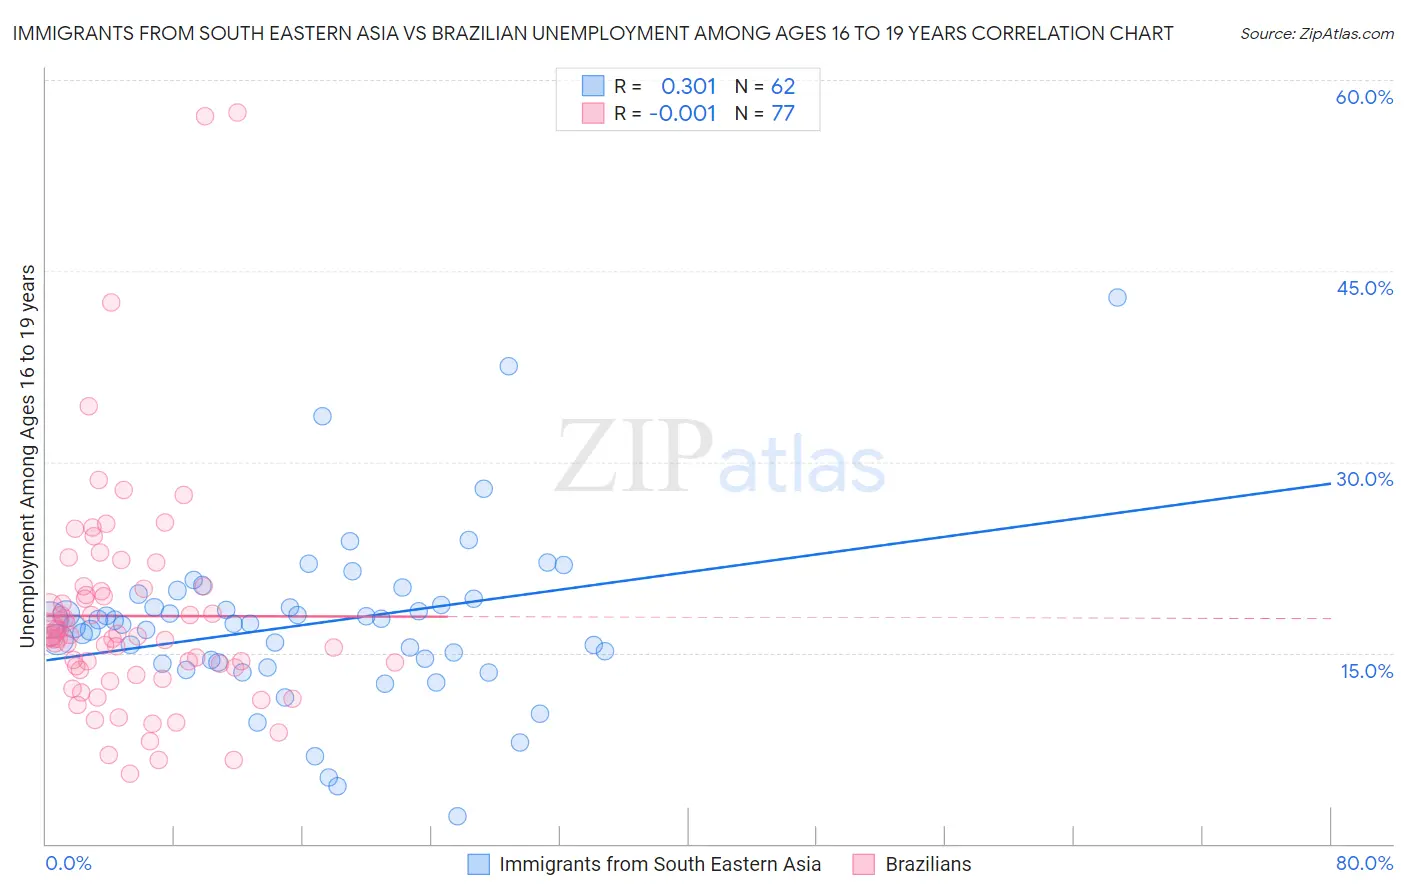 Immigrants from South Eastern Asia vs Brazilian Unemployment Among Ages 16 to 19 years